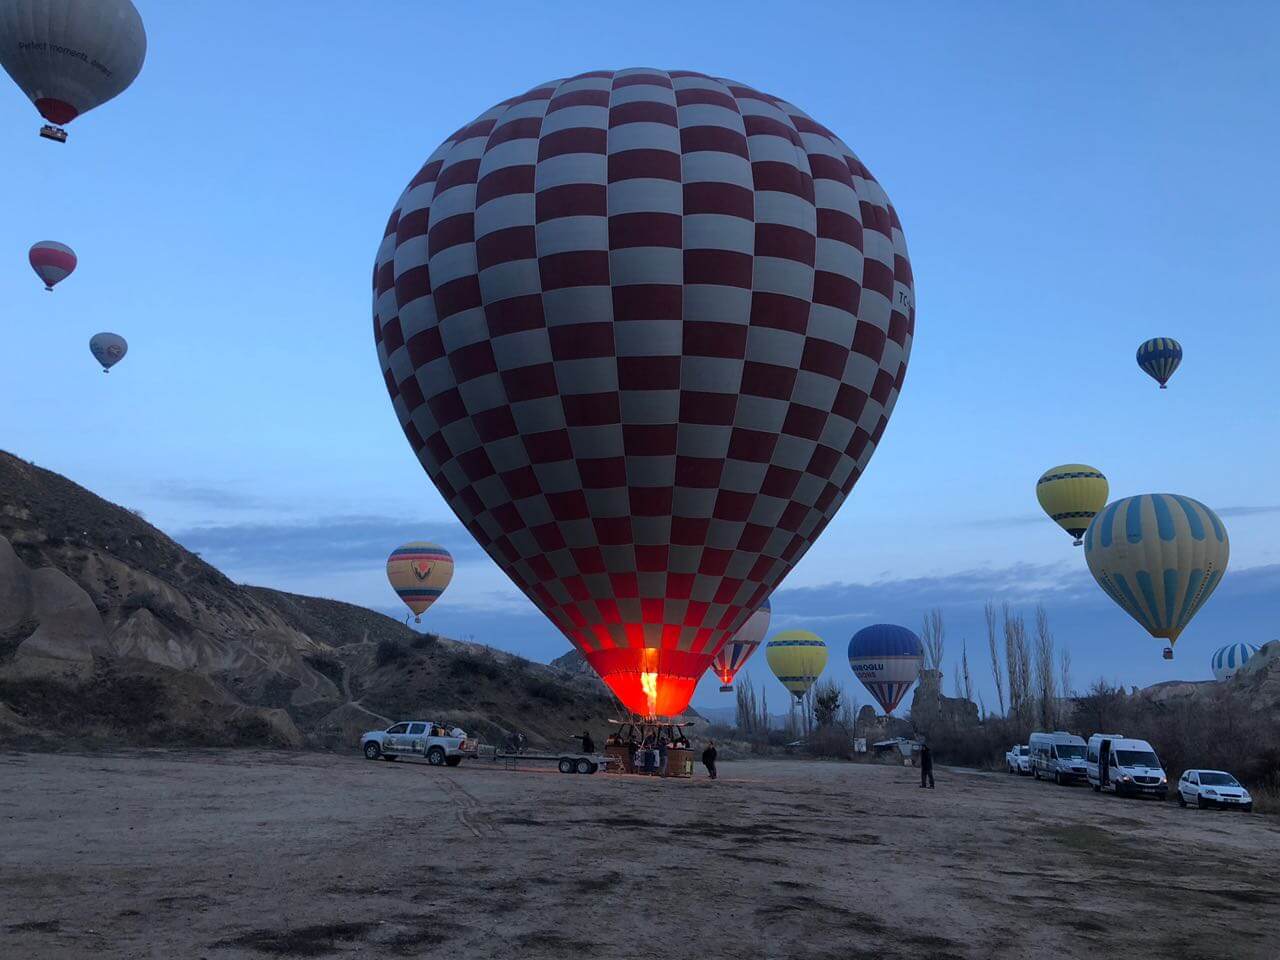 You get to see other balloons take off around you